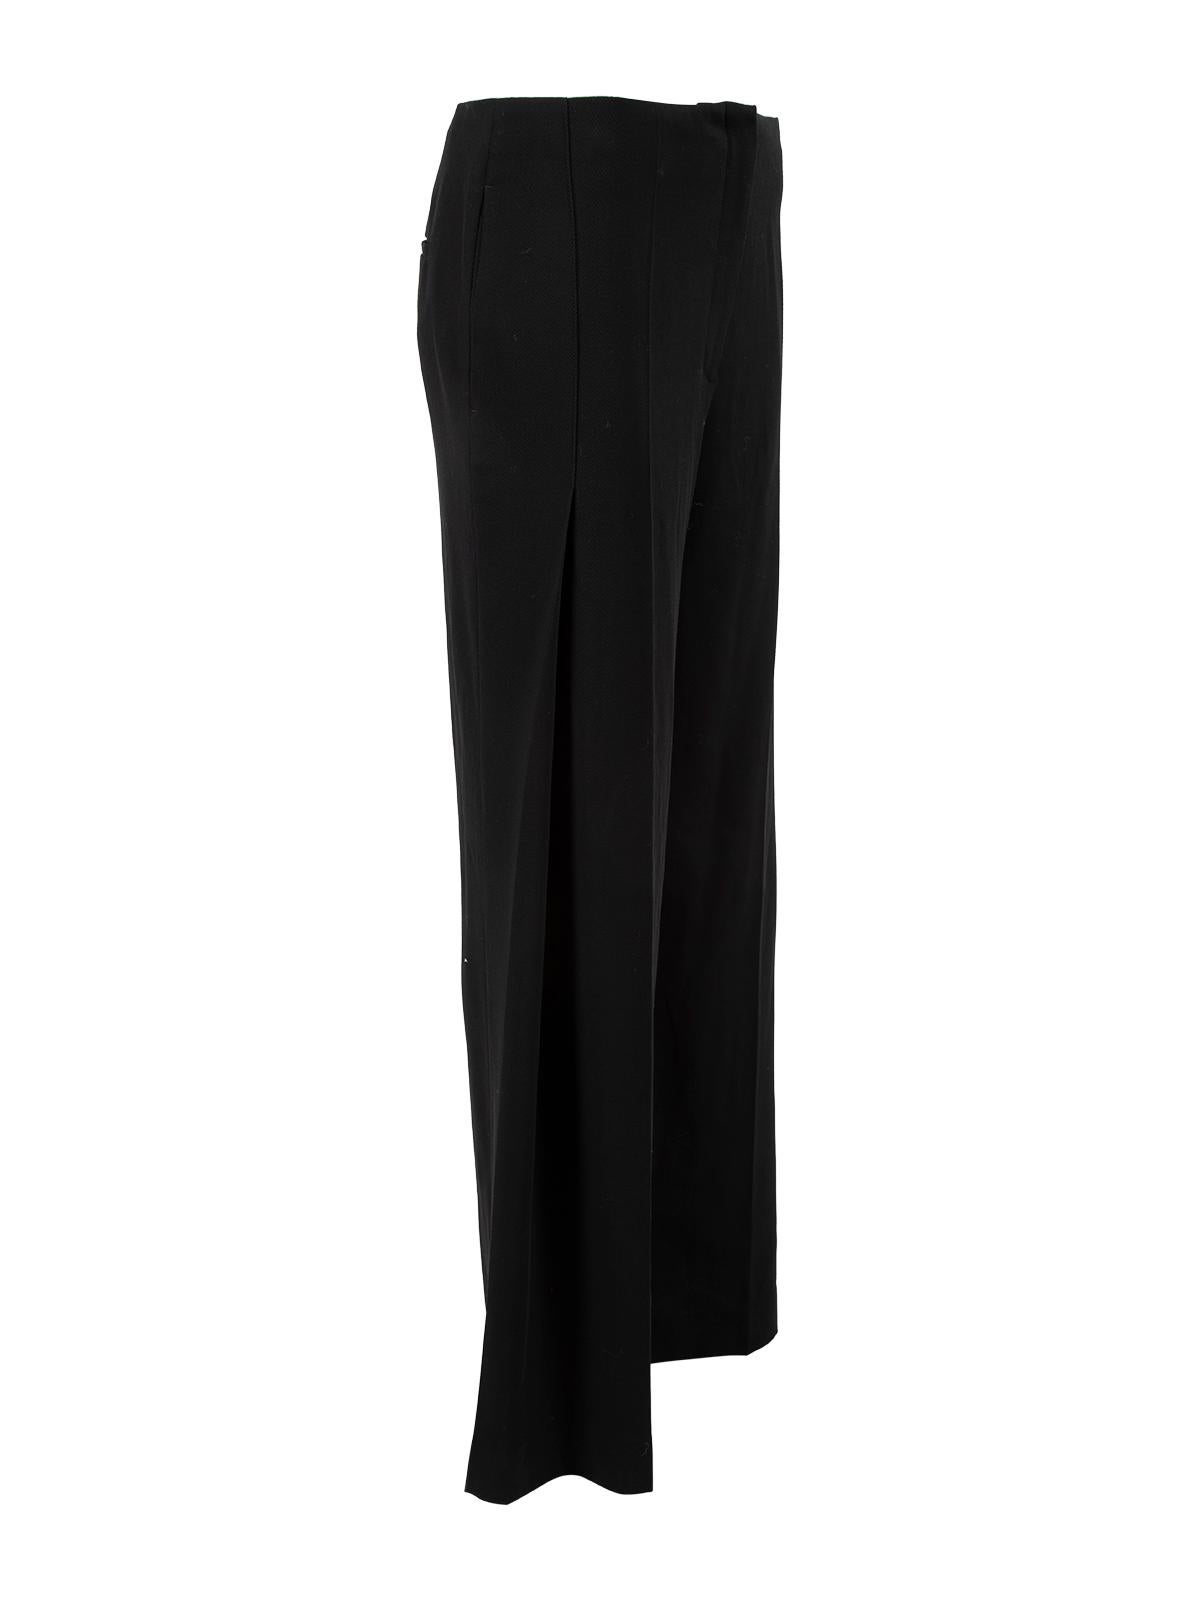 CONDITION is Never worn, with tags. No visible wear to trousers is evident on this new The Row designer resale item. Details Black Wool Wide leg High rise Front zipper fastening with clasp and button 2x Front side pocket 1x Back exterior pockets